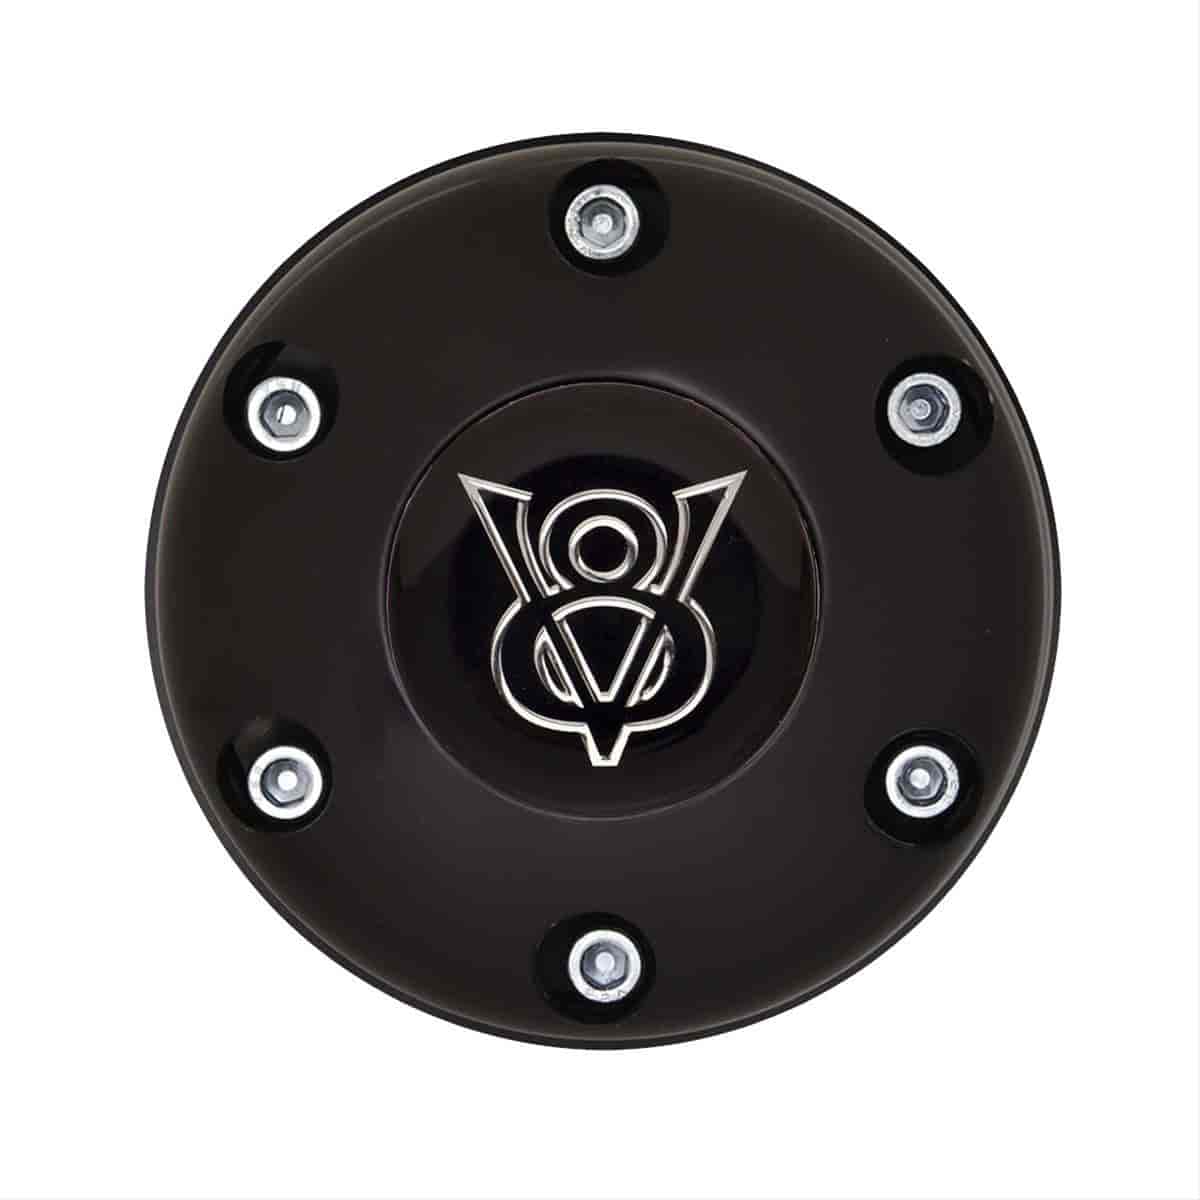 GT3 Gasser/Euro Style Horn Button "V8" Emblem Colored 6-Hole Style Black Anodized